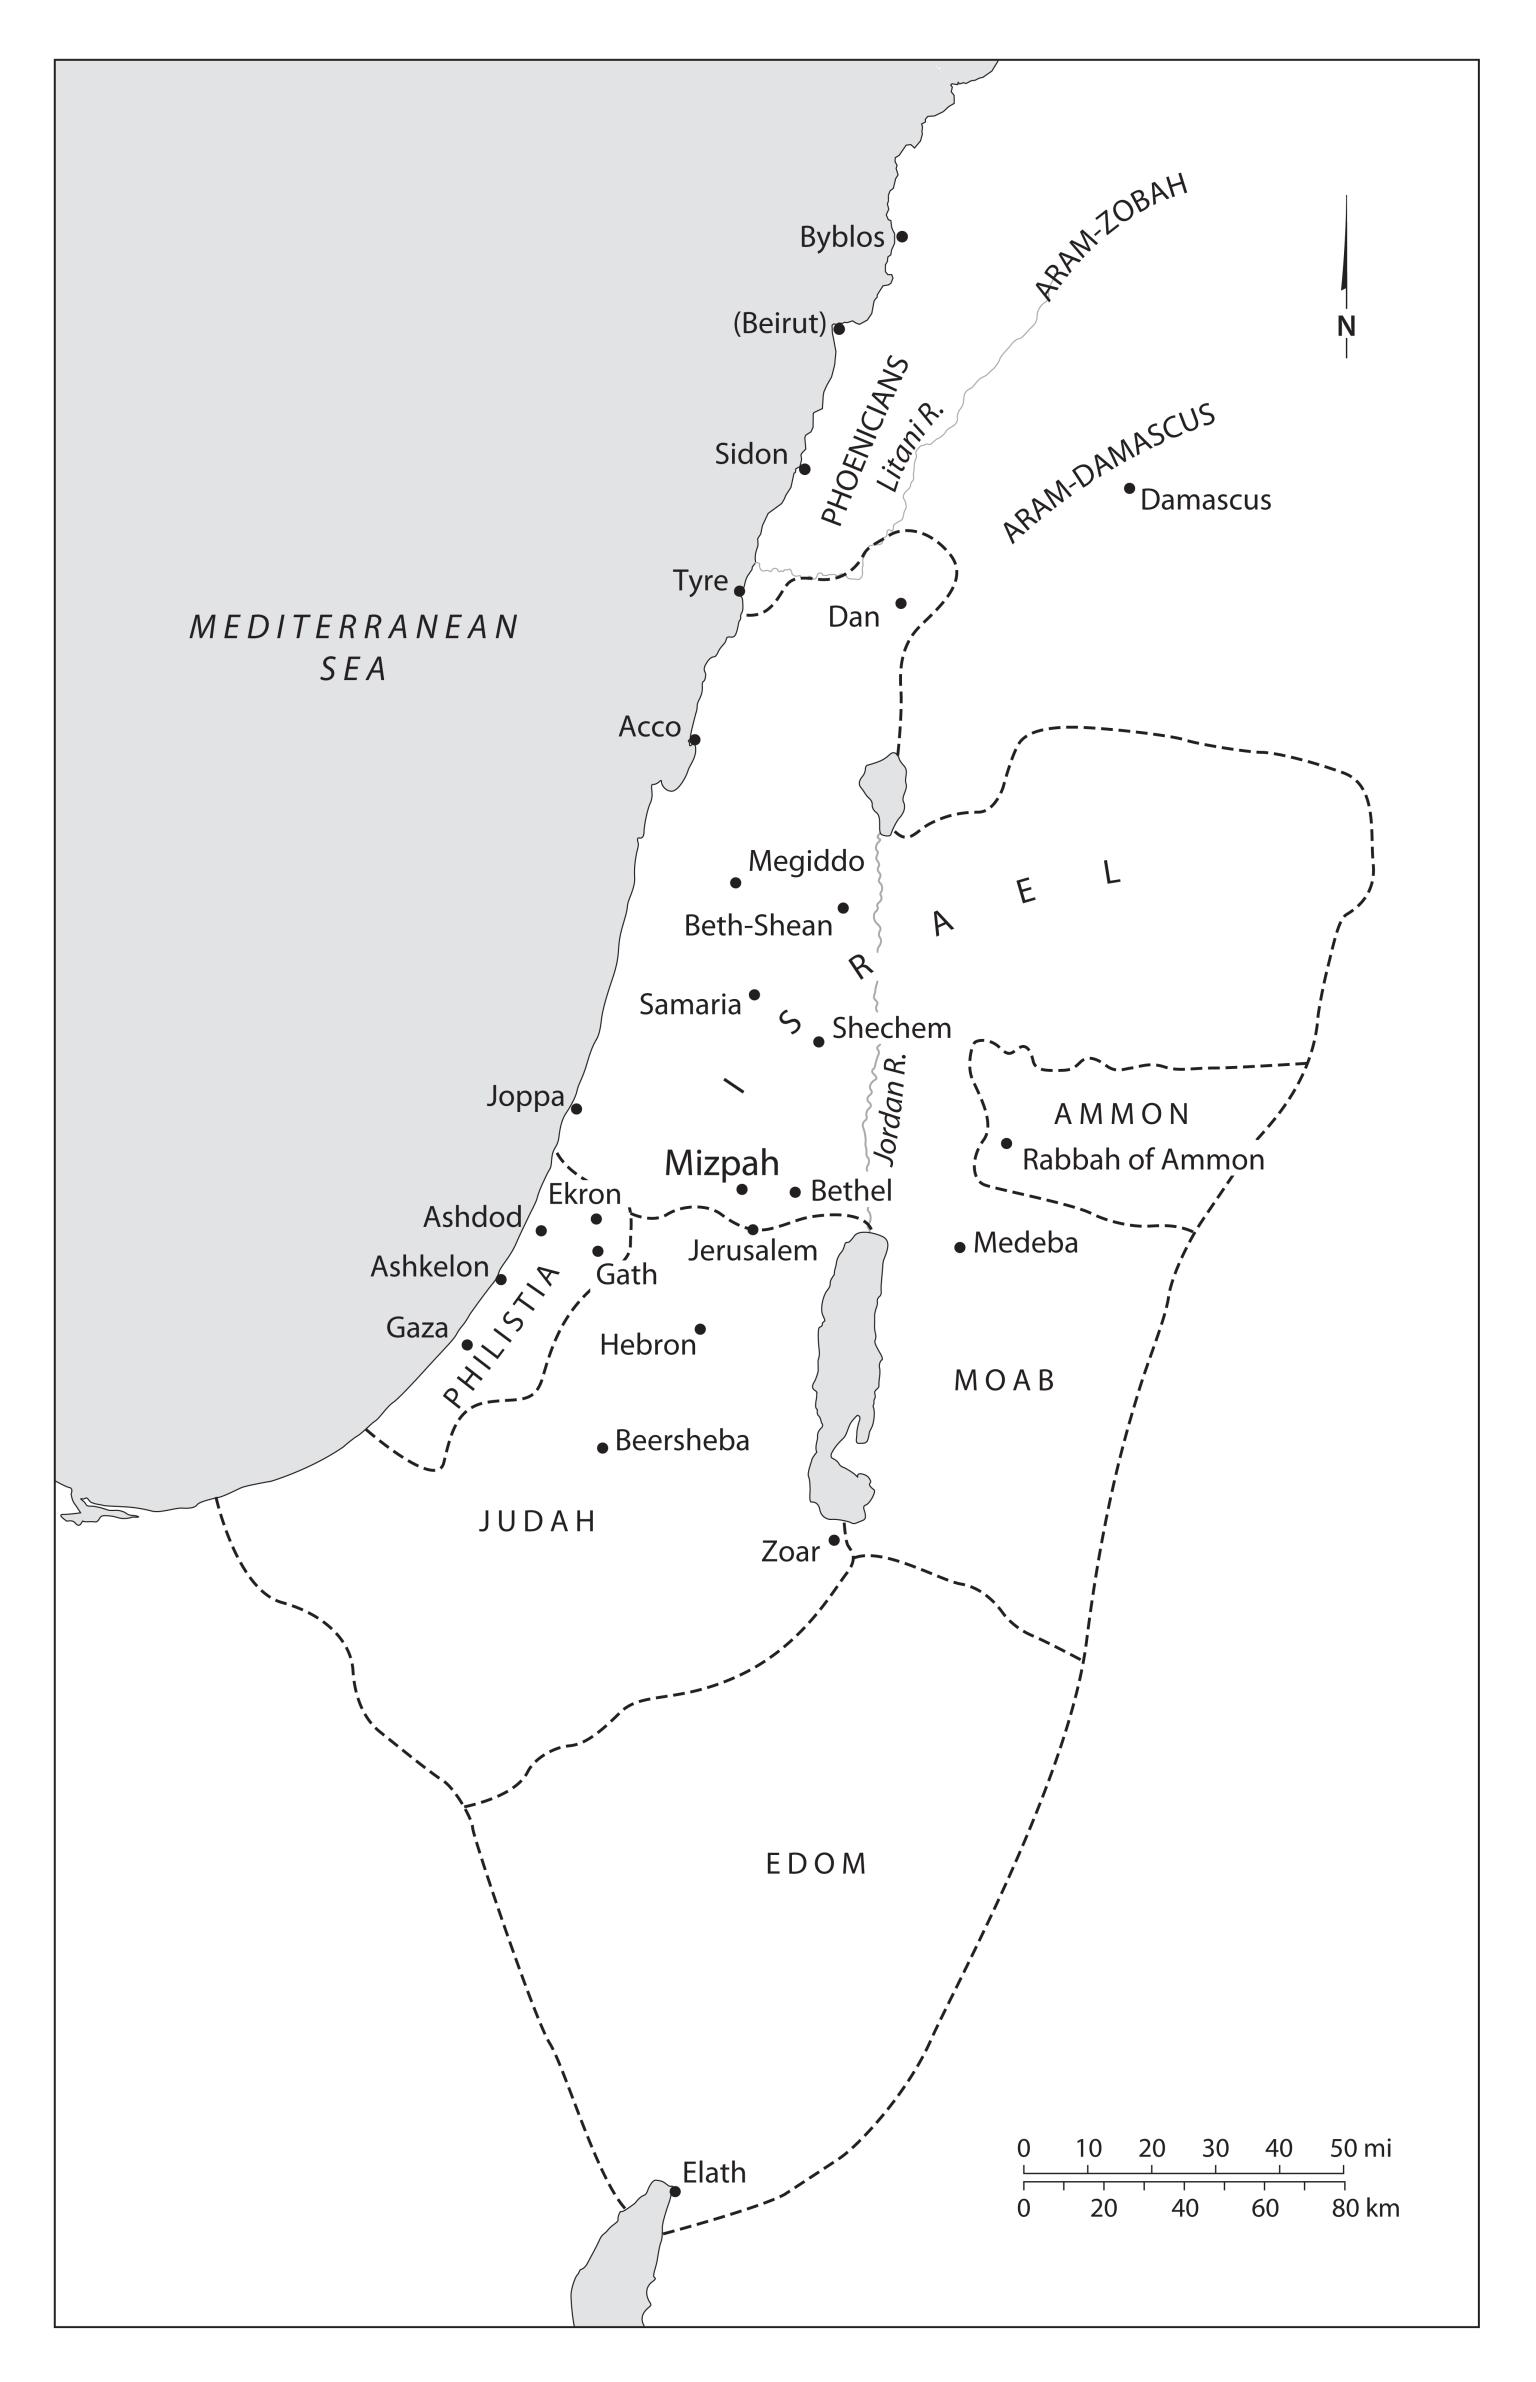 Map of Israel, Judah, and neighboring areas labeled in English. 